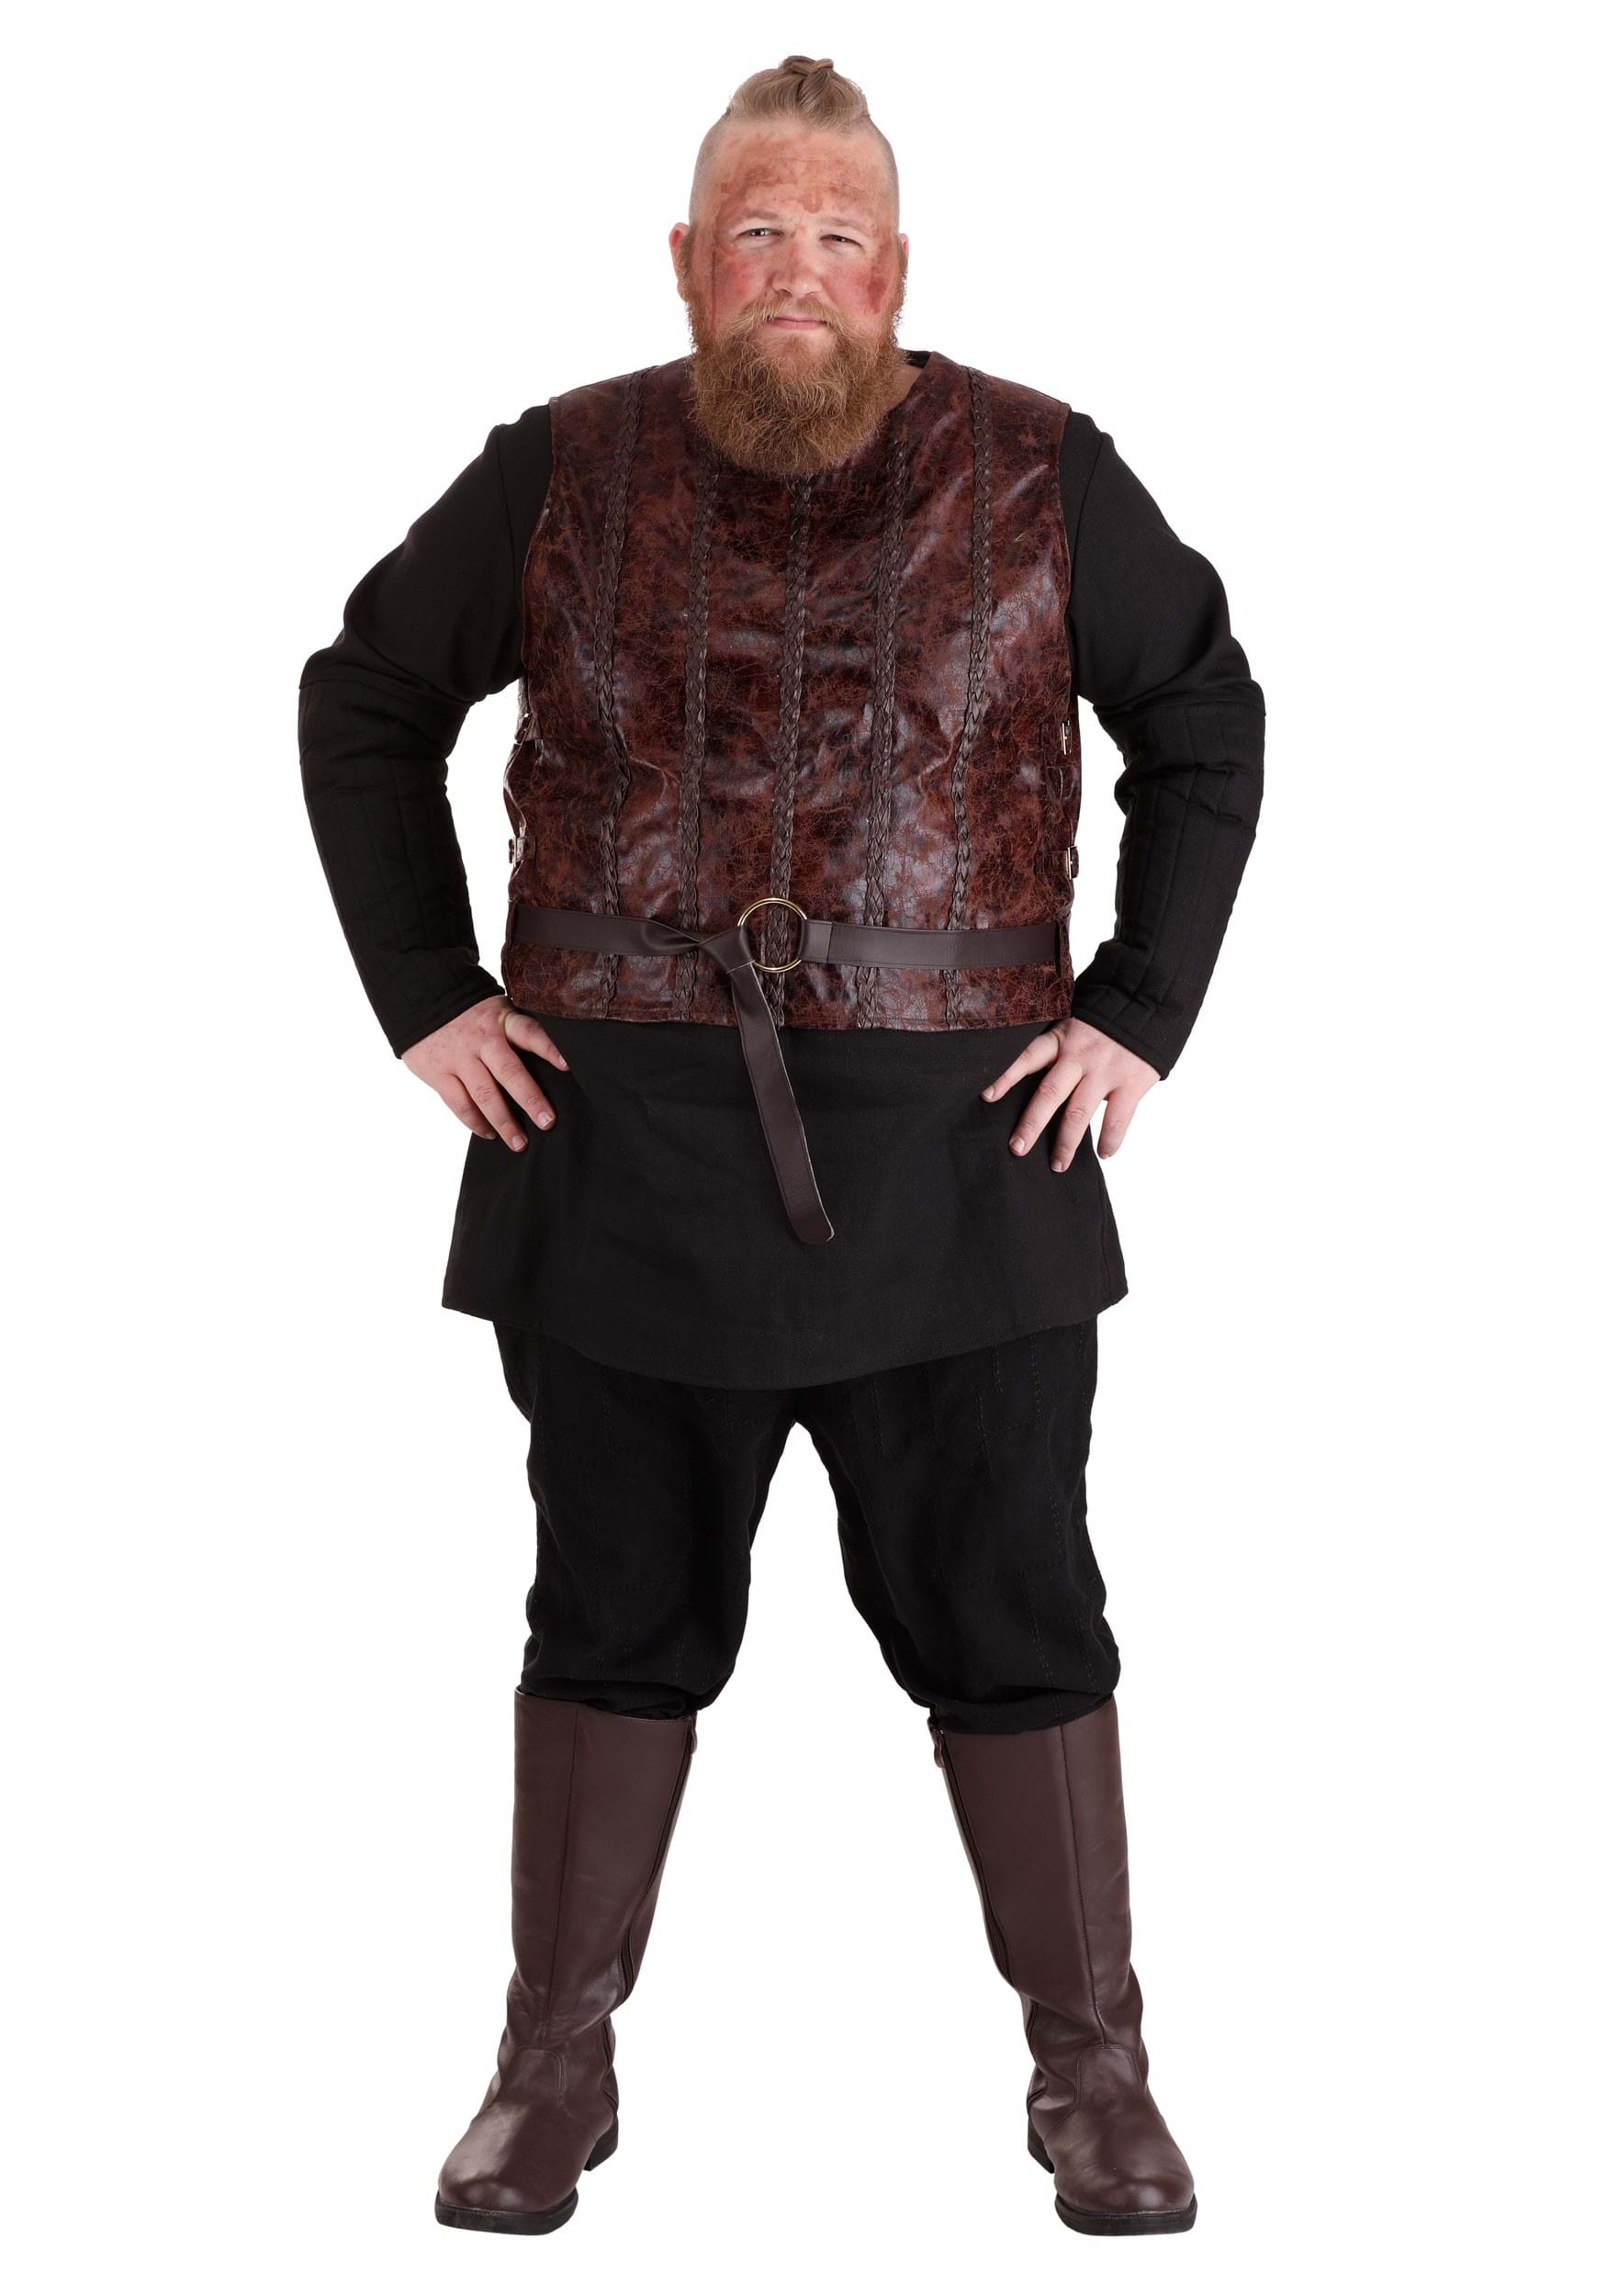 Plus Size Vikings Bjorn Ironside Costume for Adults